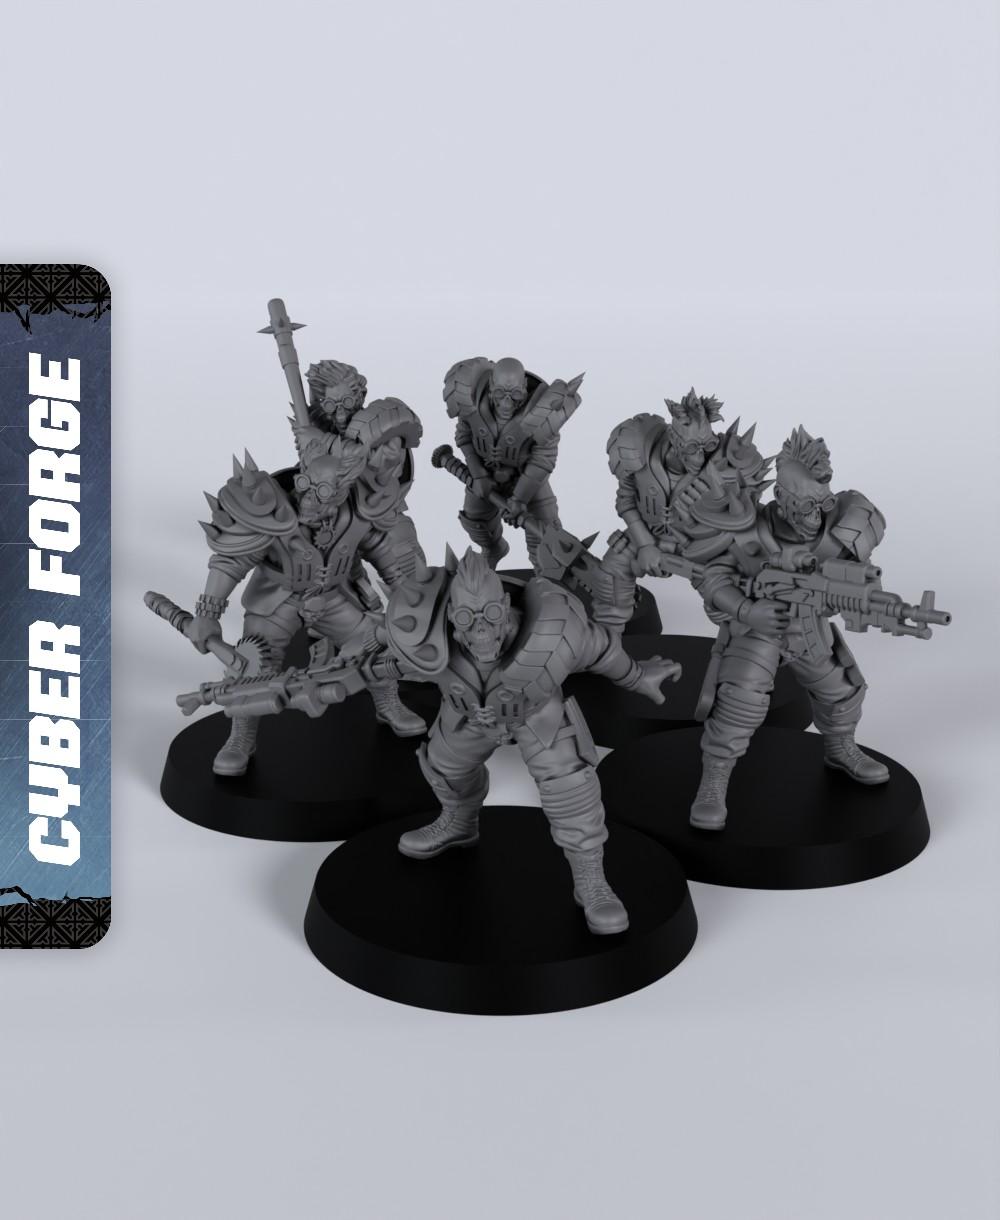 Junkers - With Free Cyberpunk Warhammer - 40k Sci-Fi Gift Ideas for RPG and Wargamers 3d model